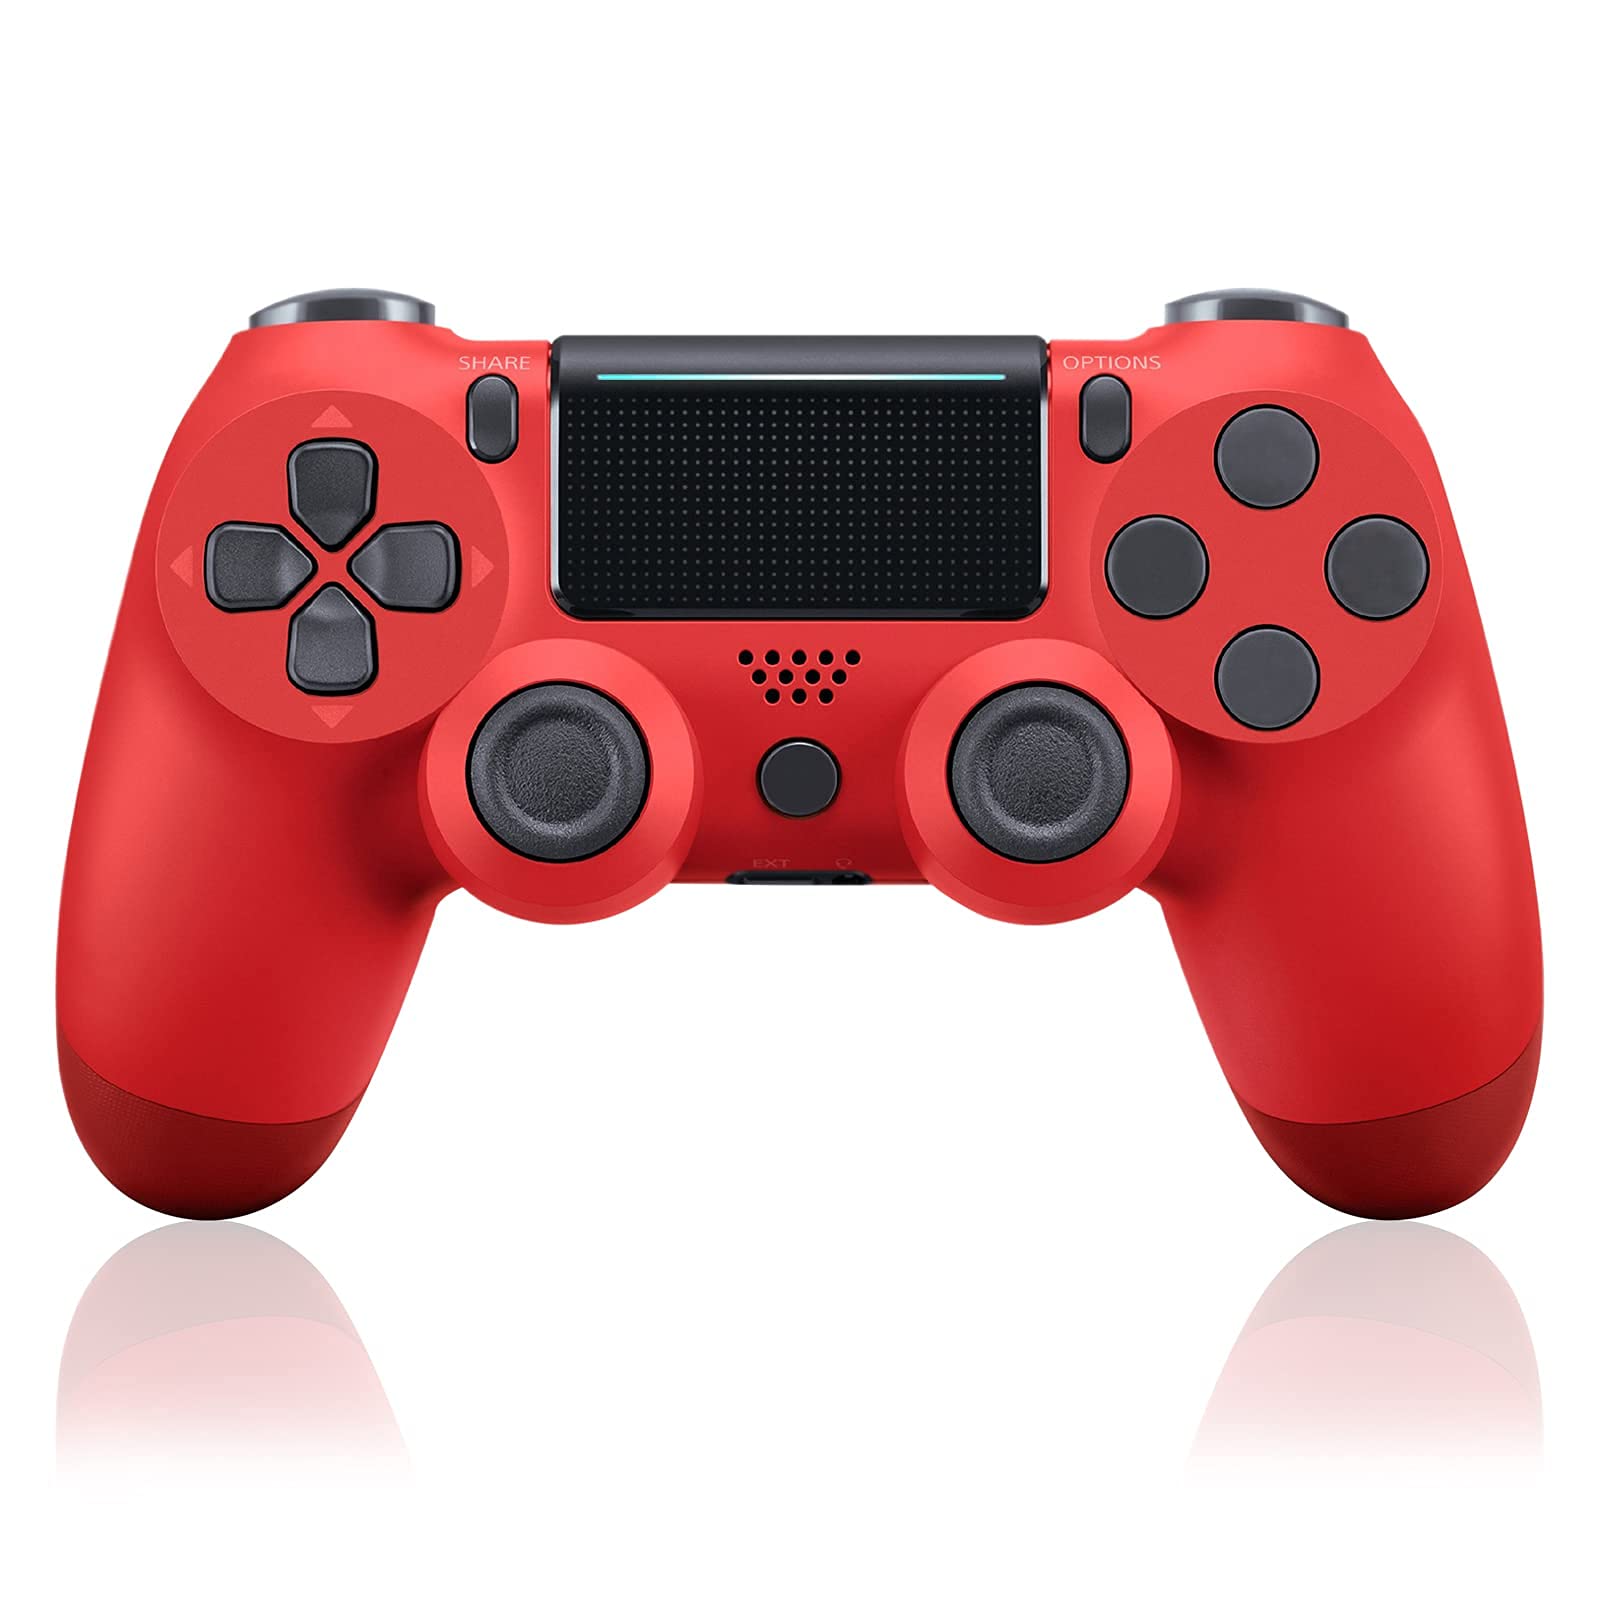 Bluetooth Wireless Game Controller for PS4/Slim/Pro/PC/iOS/Android/Steam with Dual Vibration, Headphone Jack Red